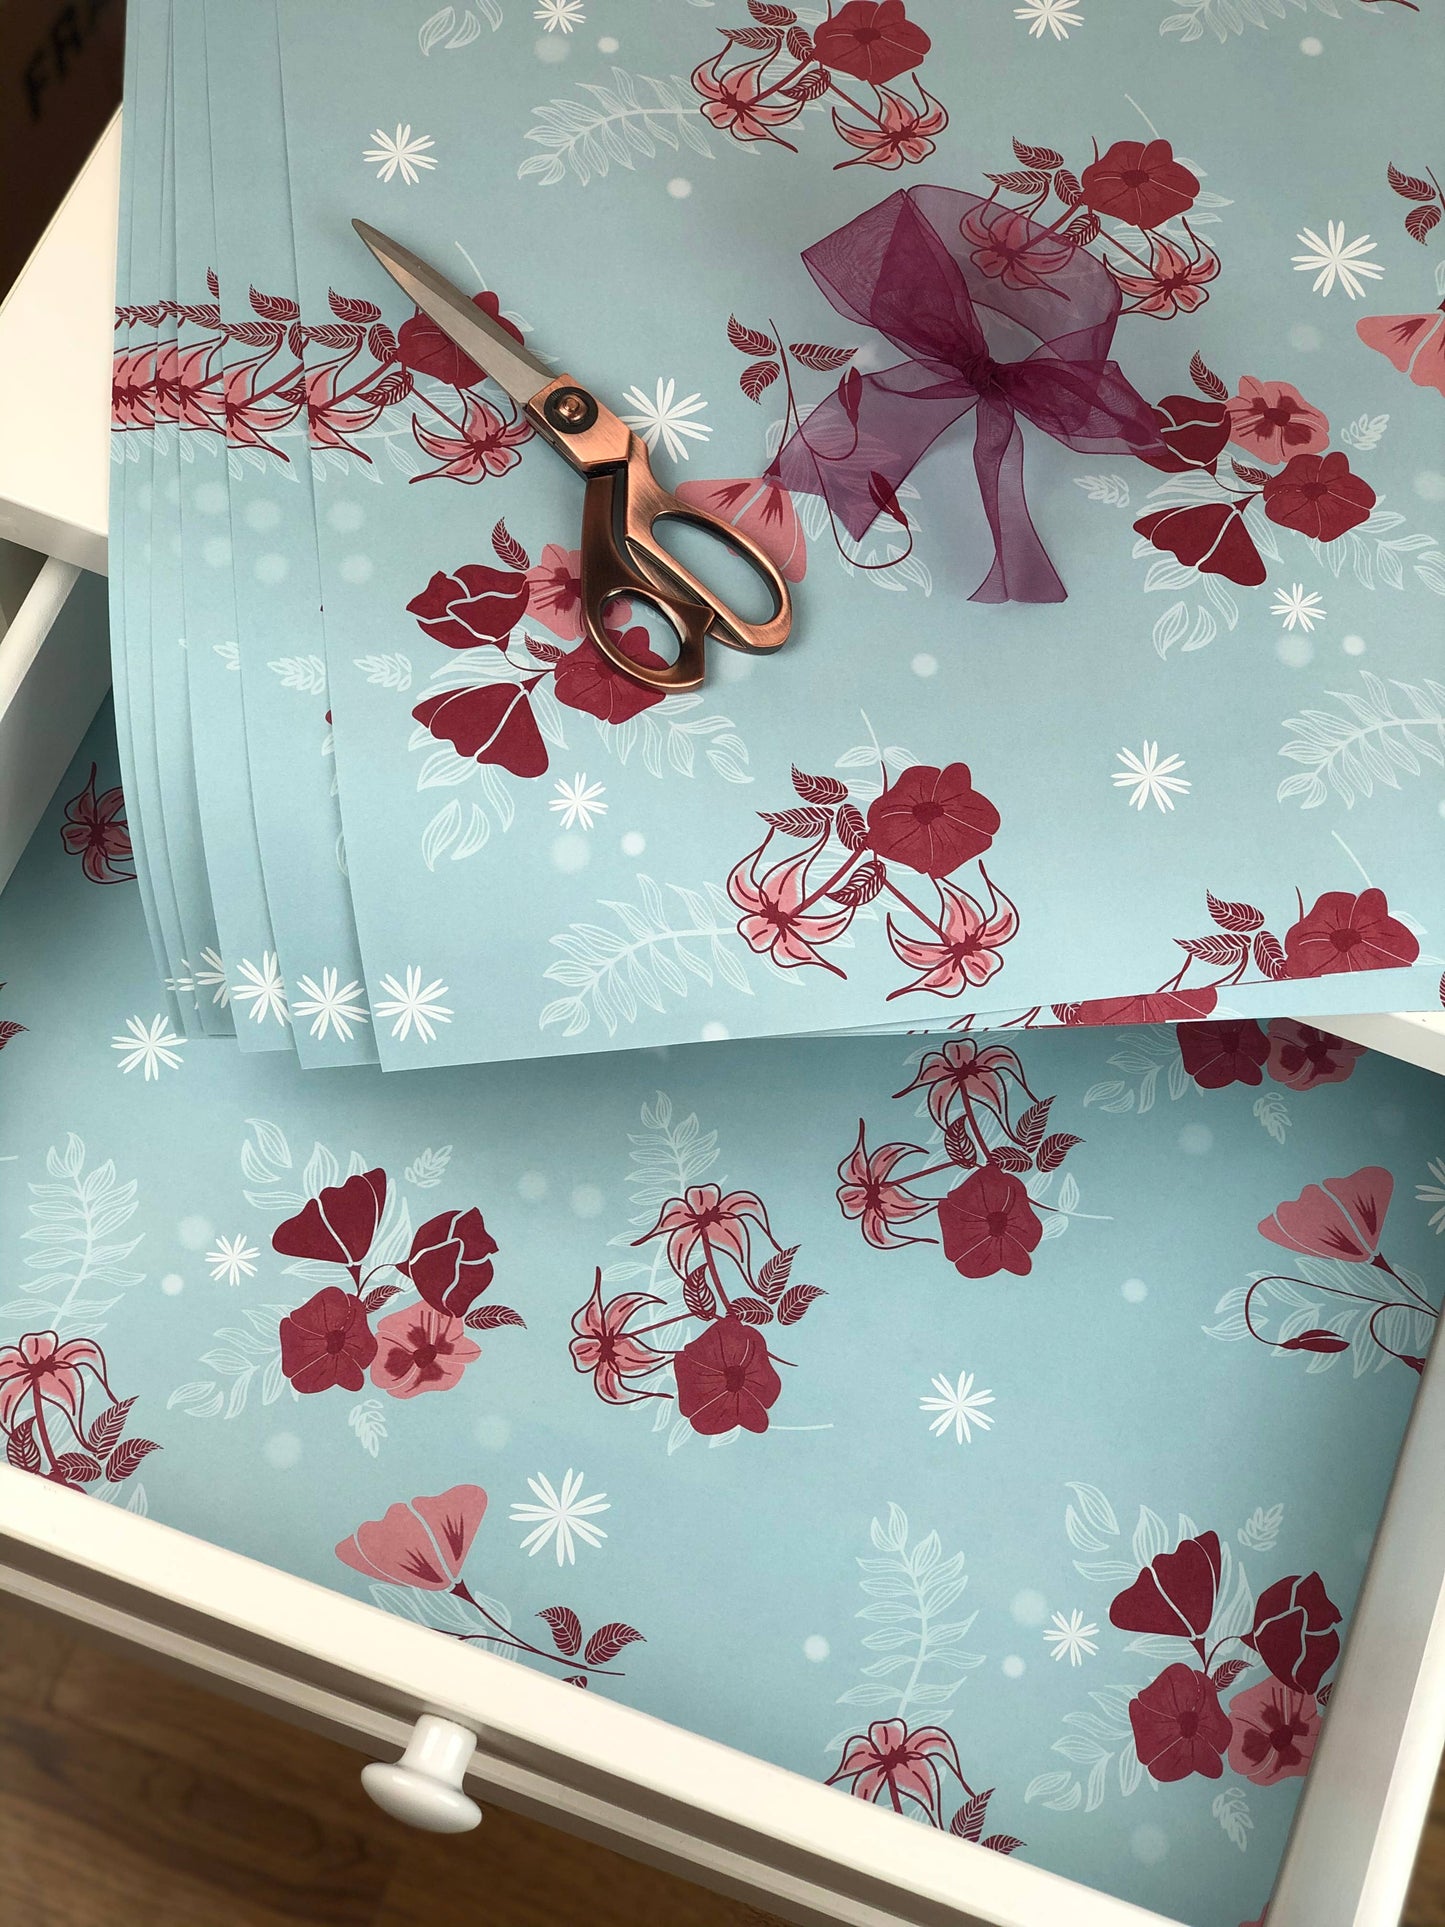 Scentennials Products - Poppy Delight Scented Drawer Liners